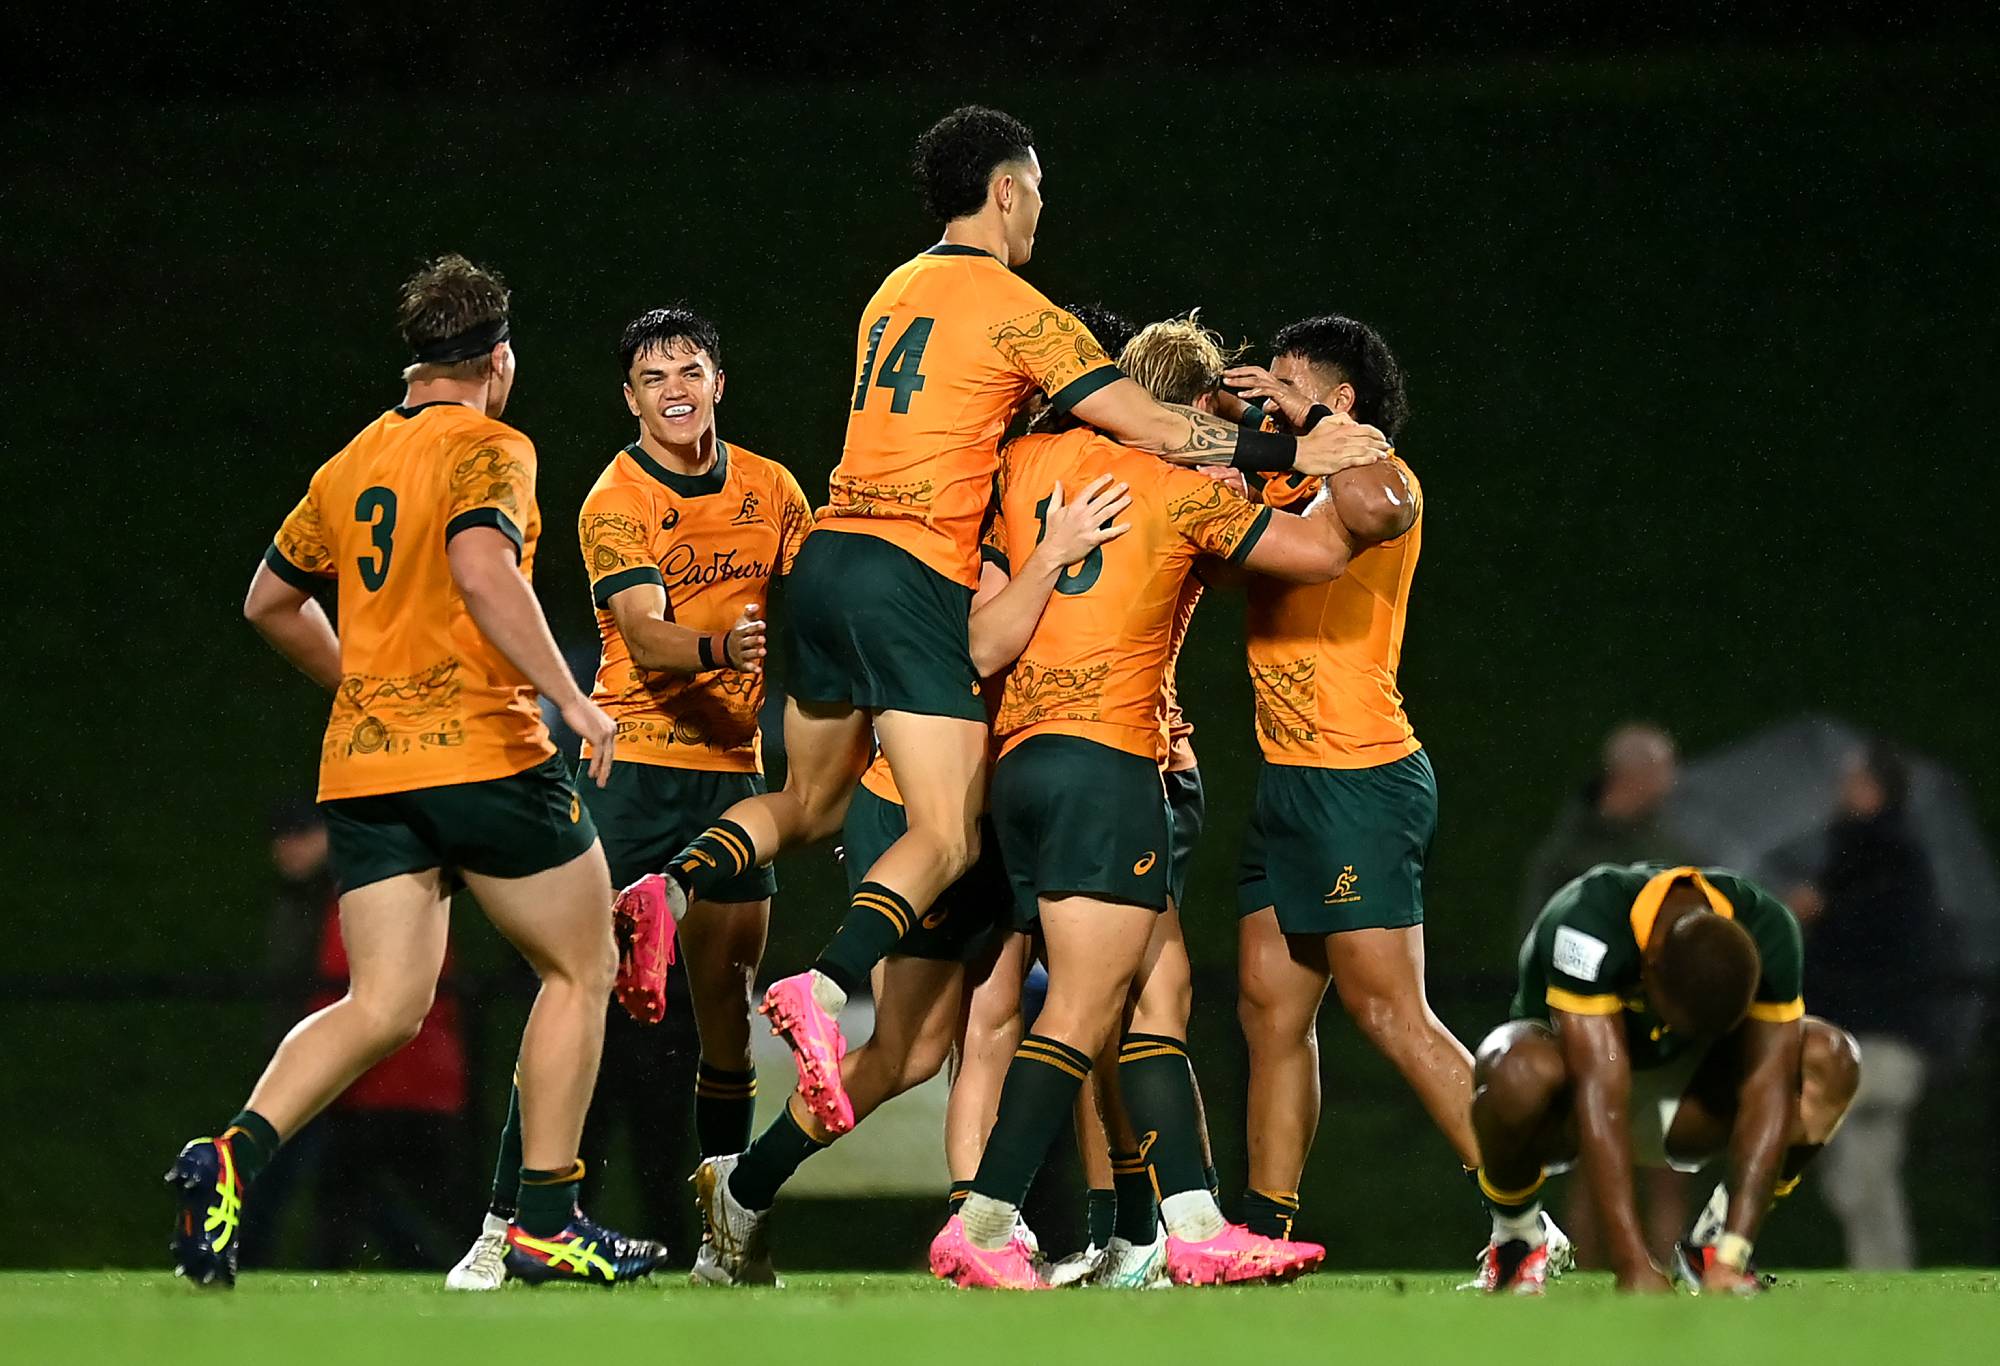 ‘Everyone was dogs’: Junior Wallabies roll up their sleeves to beat Springboks in TRC as rising fullback scores twice